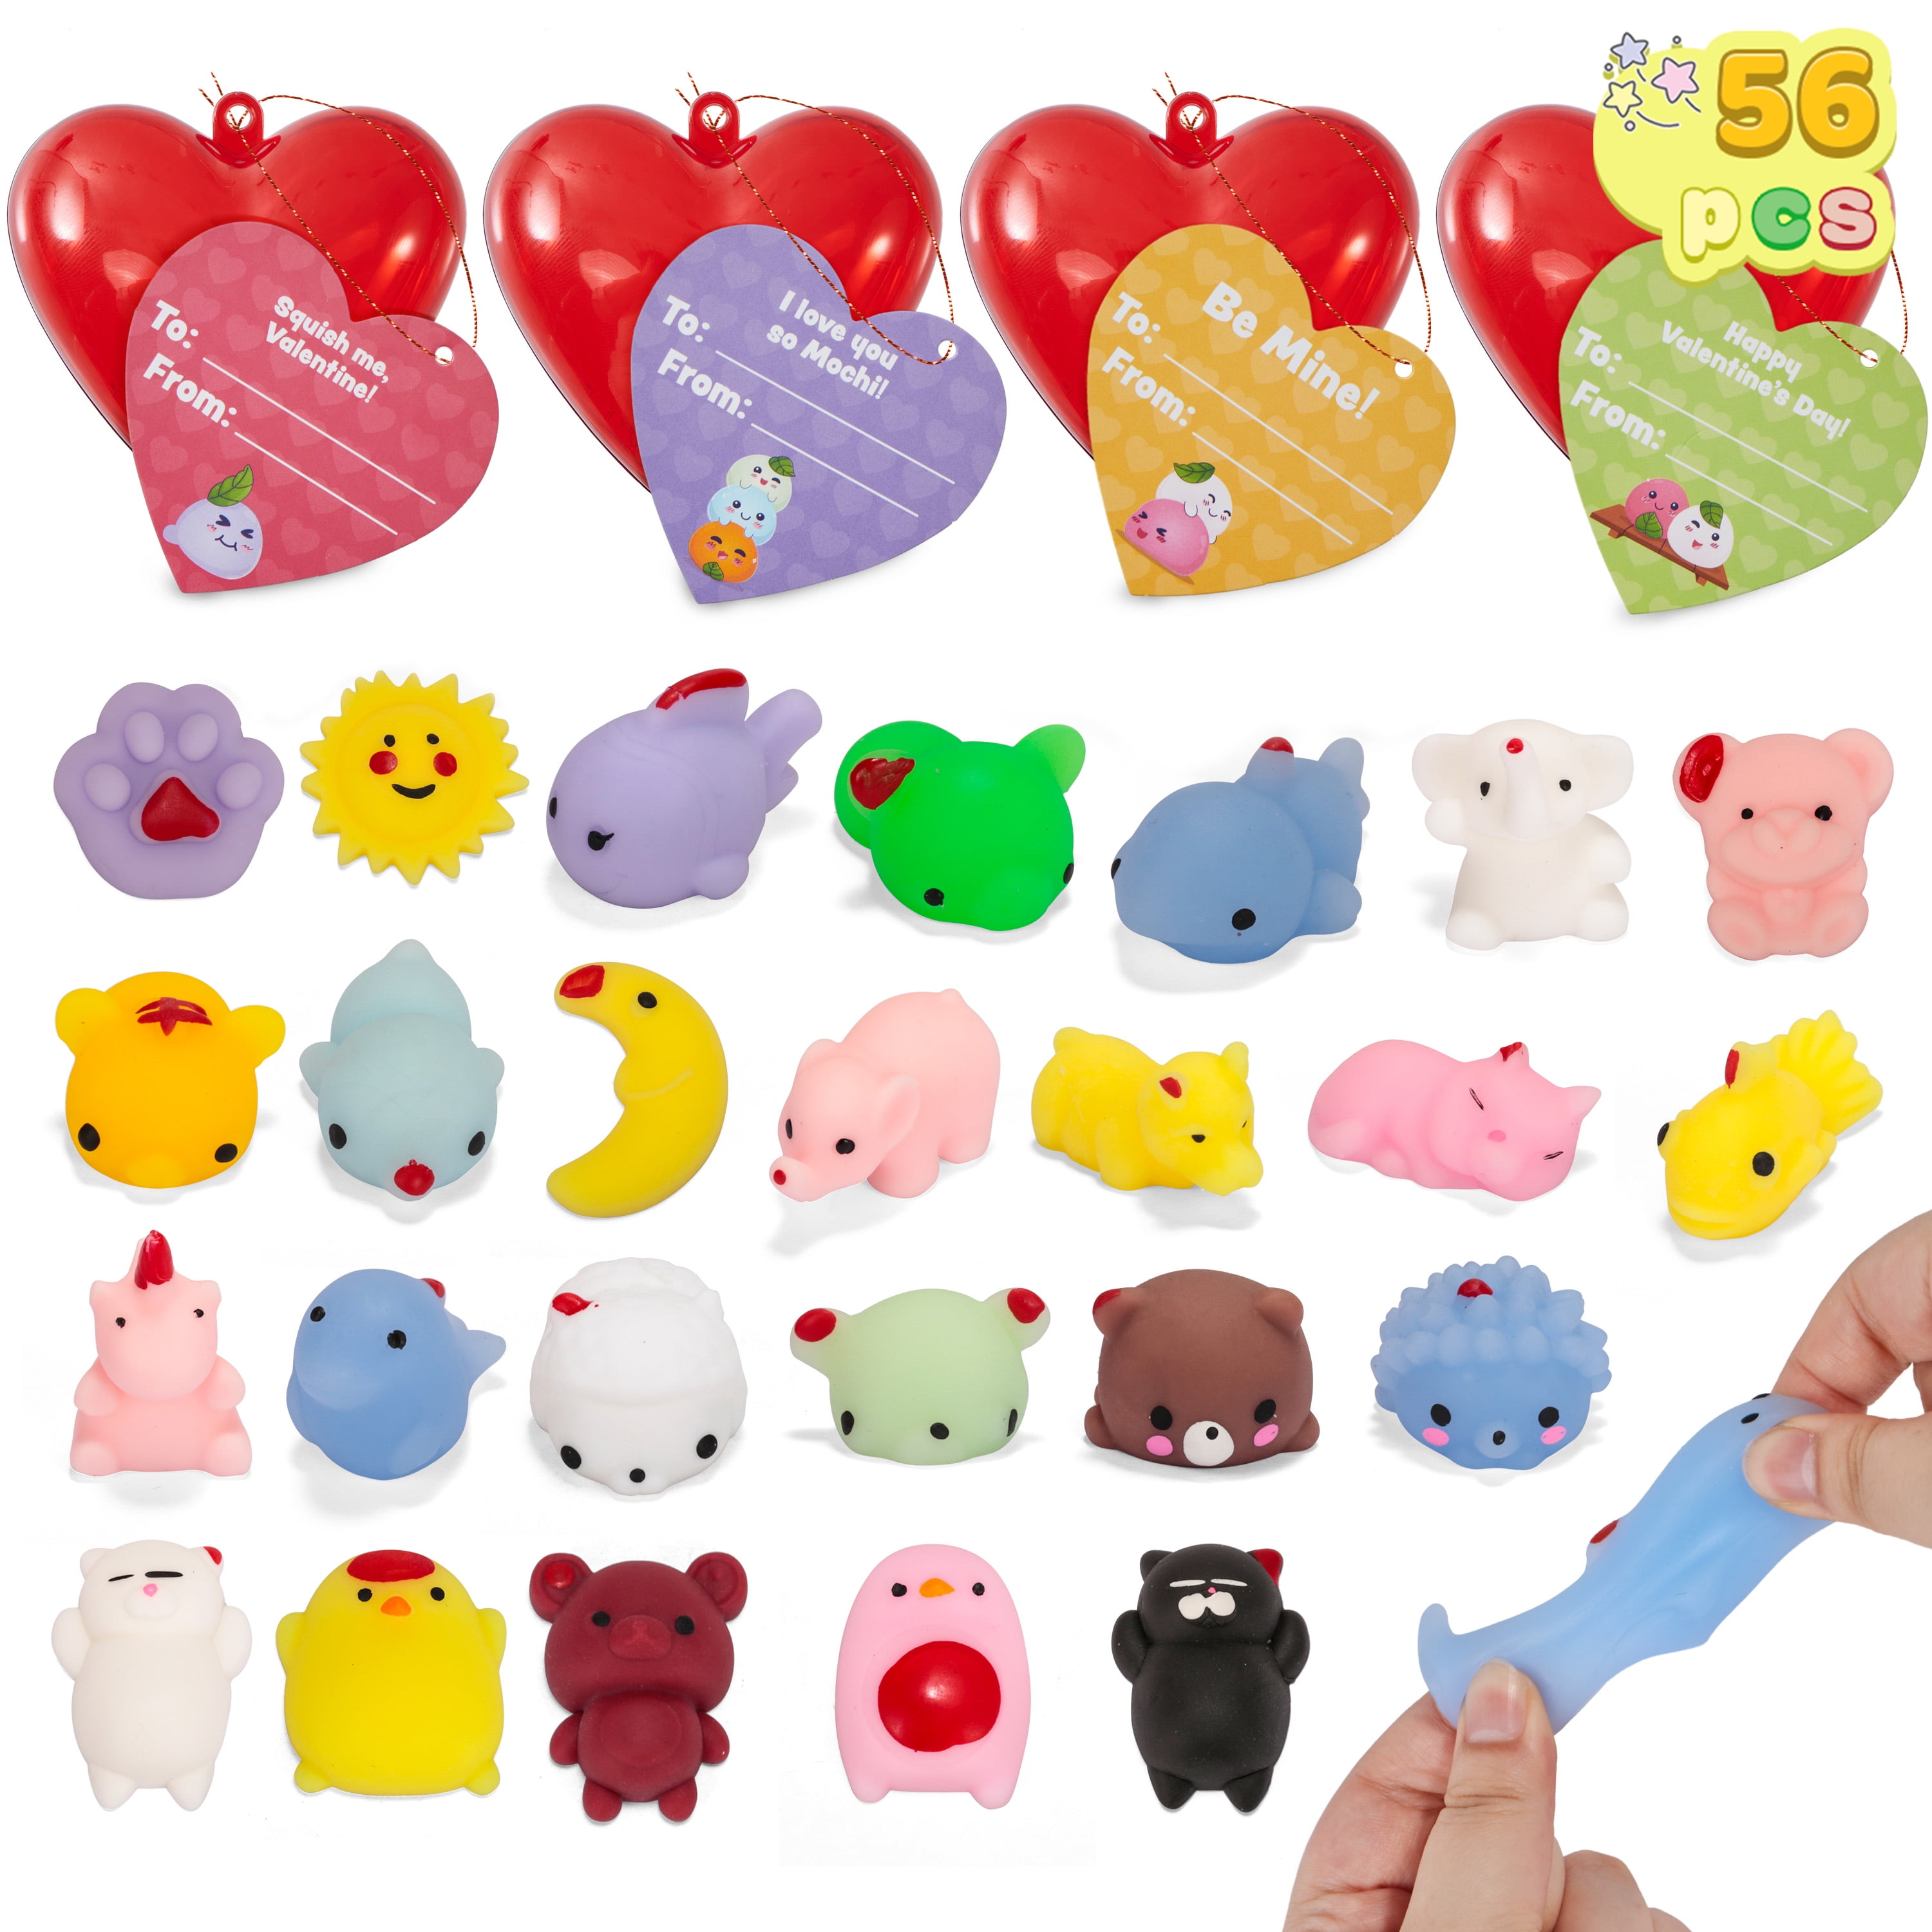 Red Heart Stickers by Knot & Bow – Mochi Kids